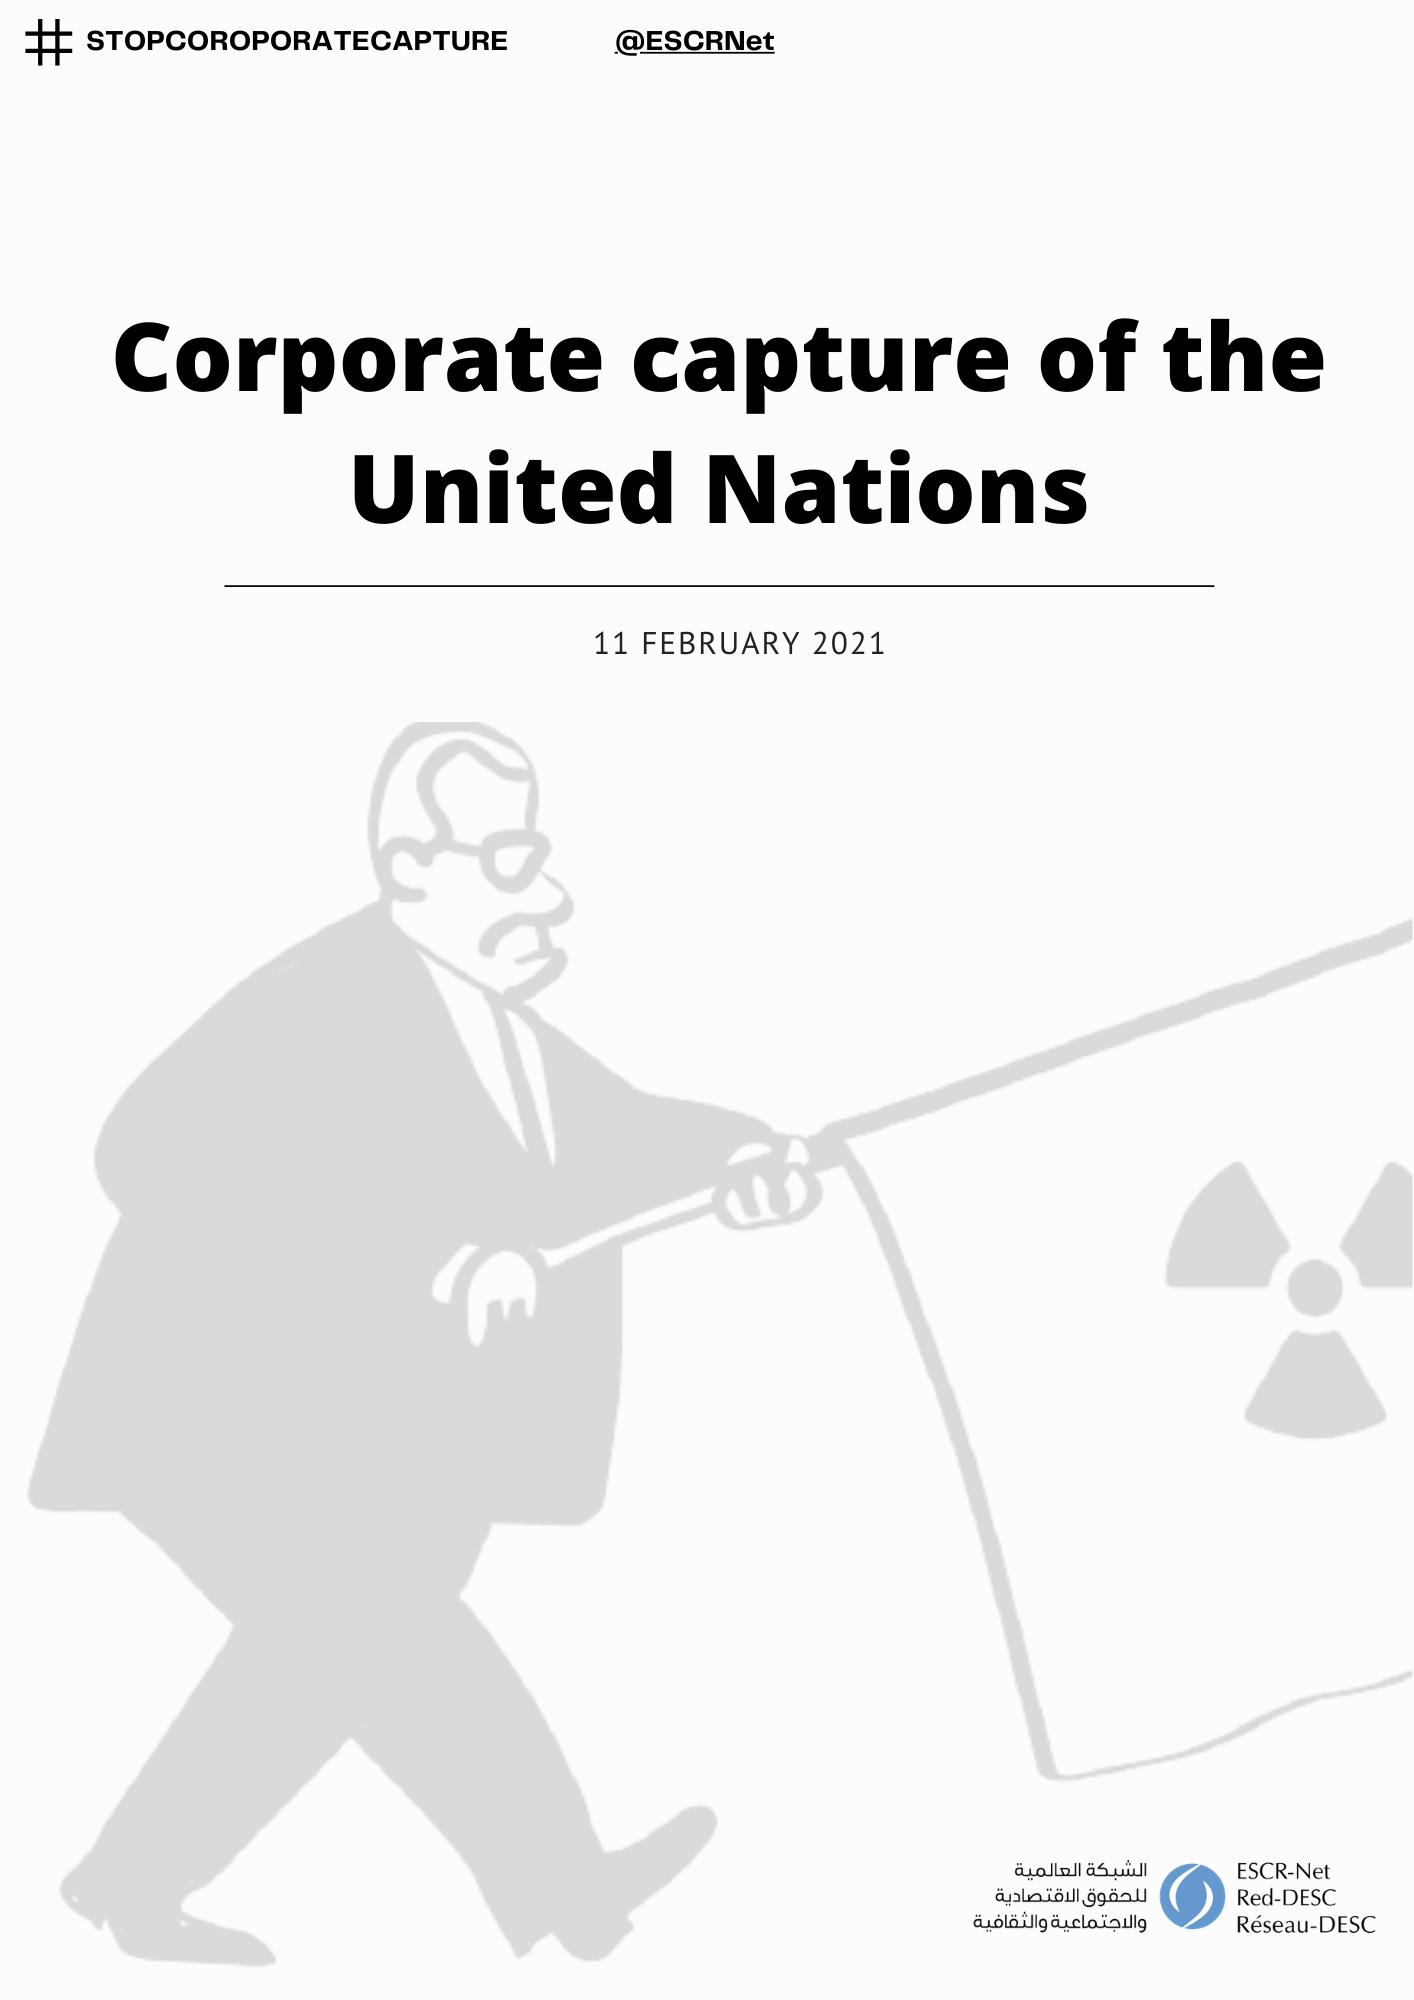 Background Document - Corporate capture of the United Nations | ESCR-Net